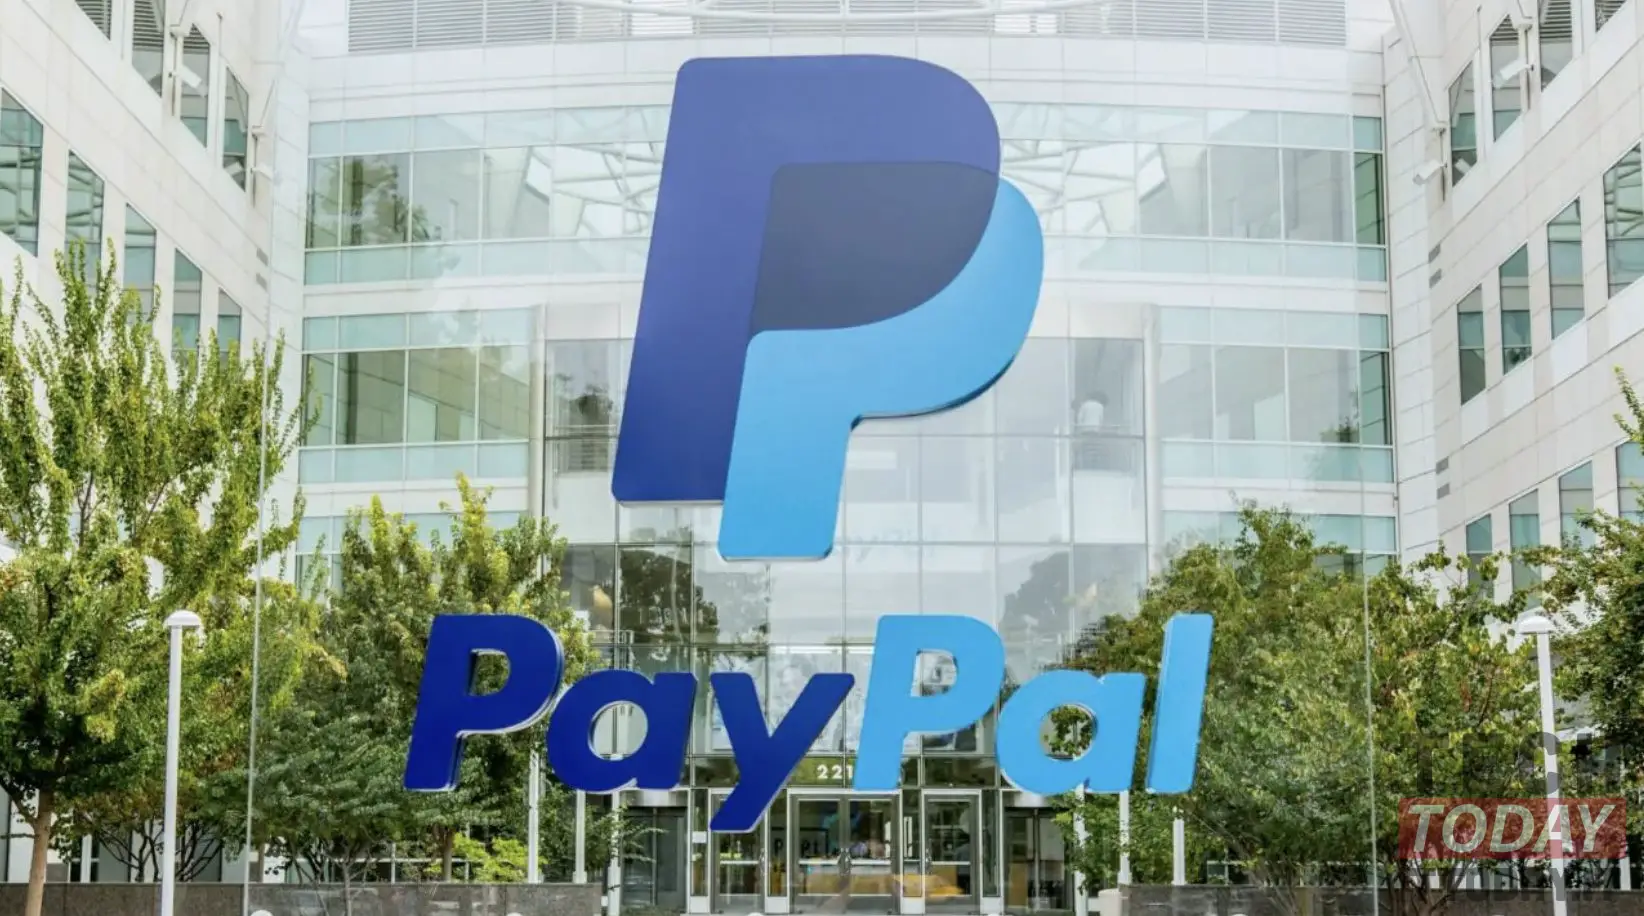 PayPal will charge € 10 if we don't use the account